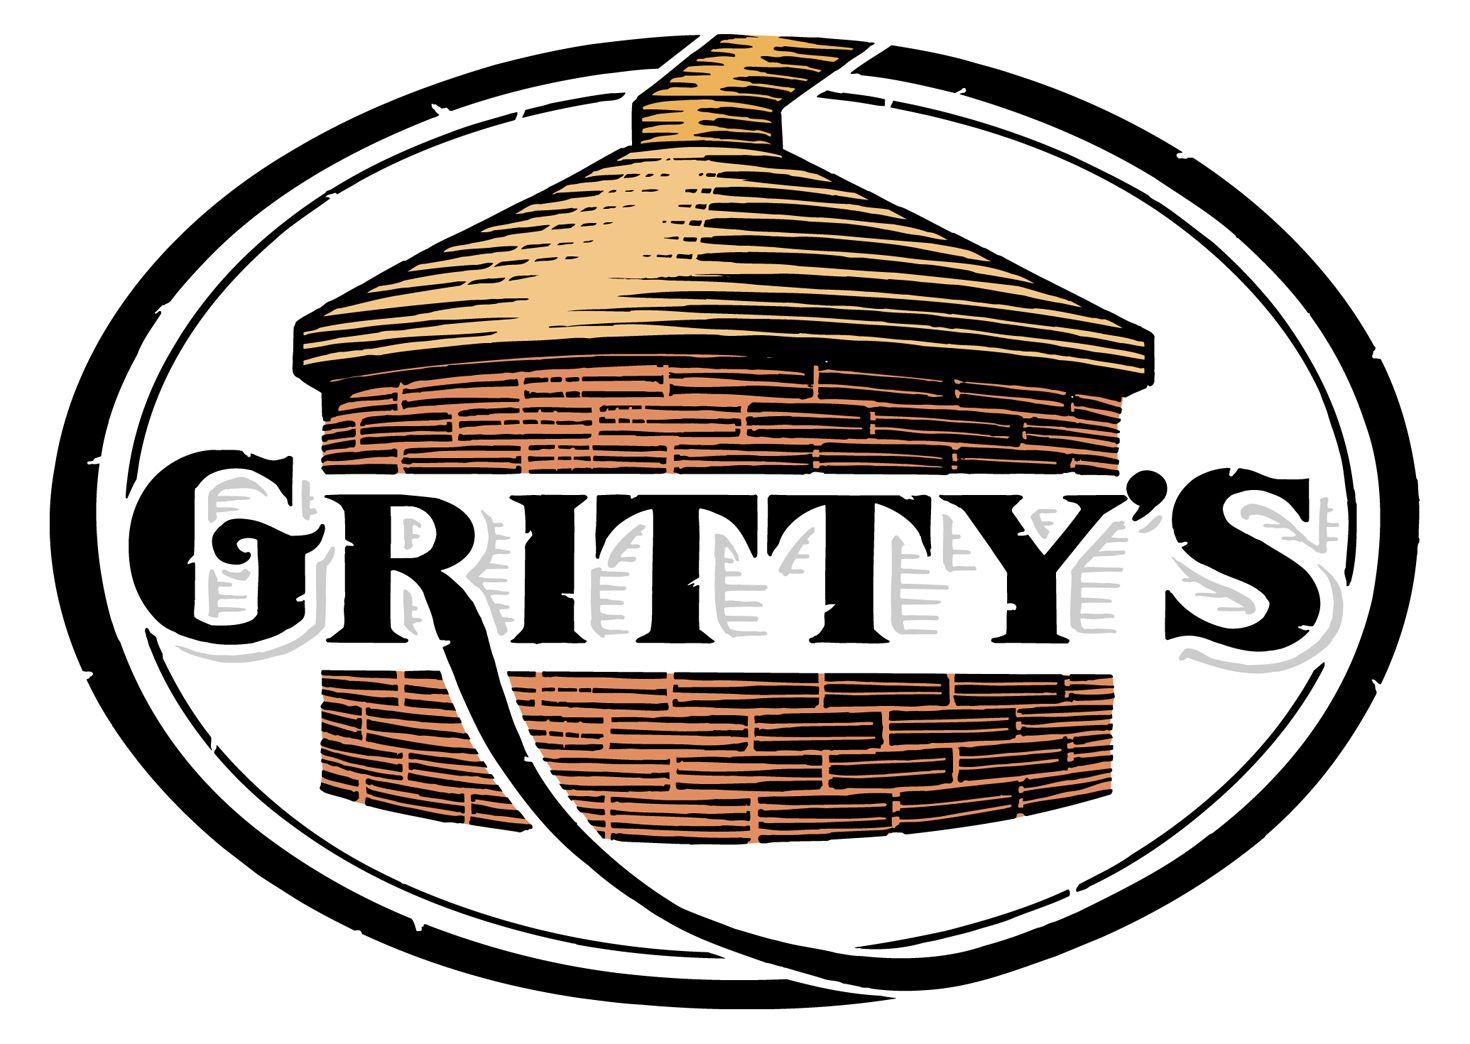 Gritty's Logo - Maine's Award-Winning Brew Pub and Brewery - Gritty's